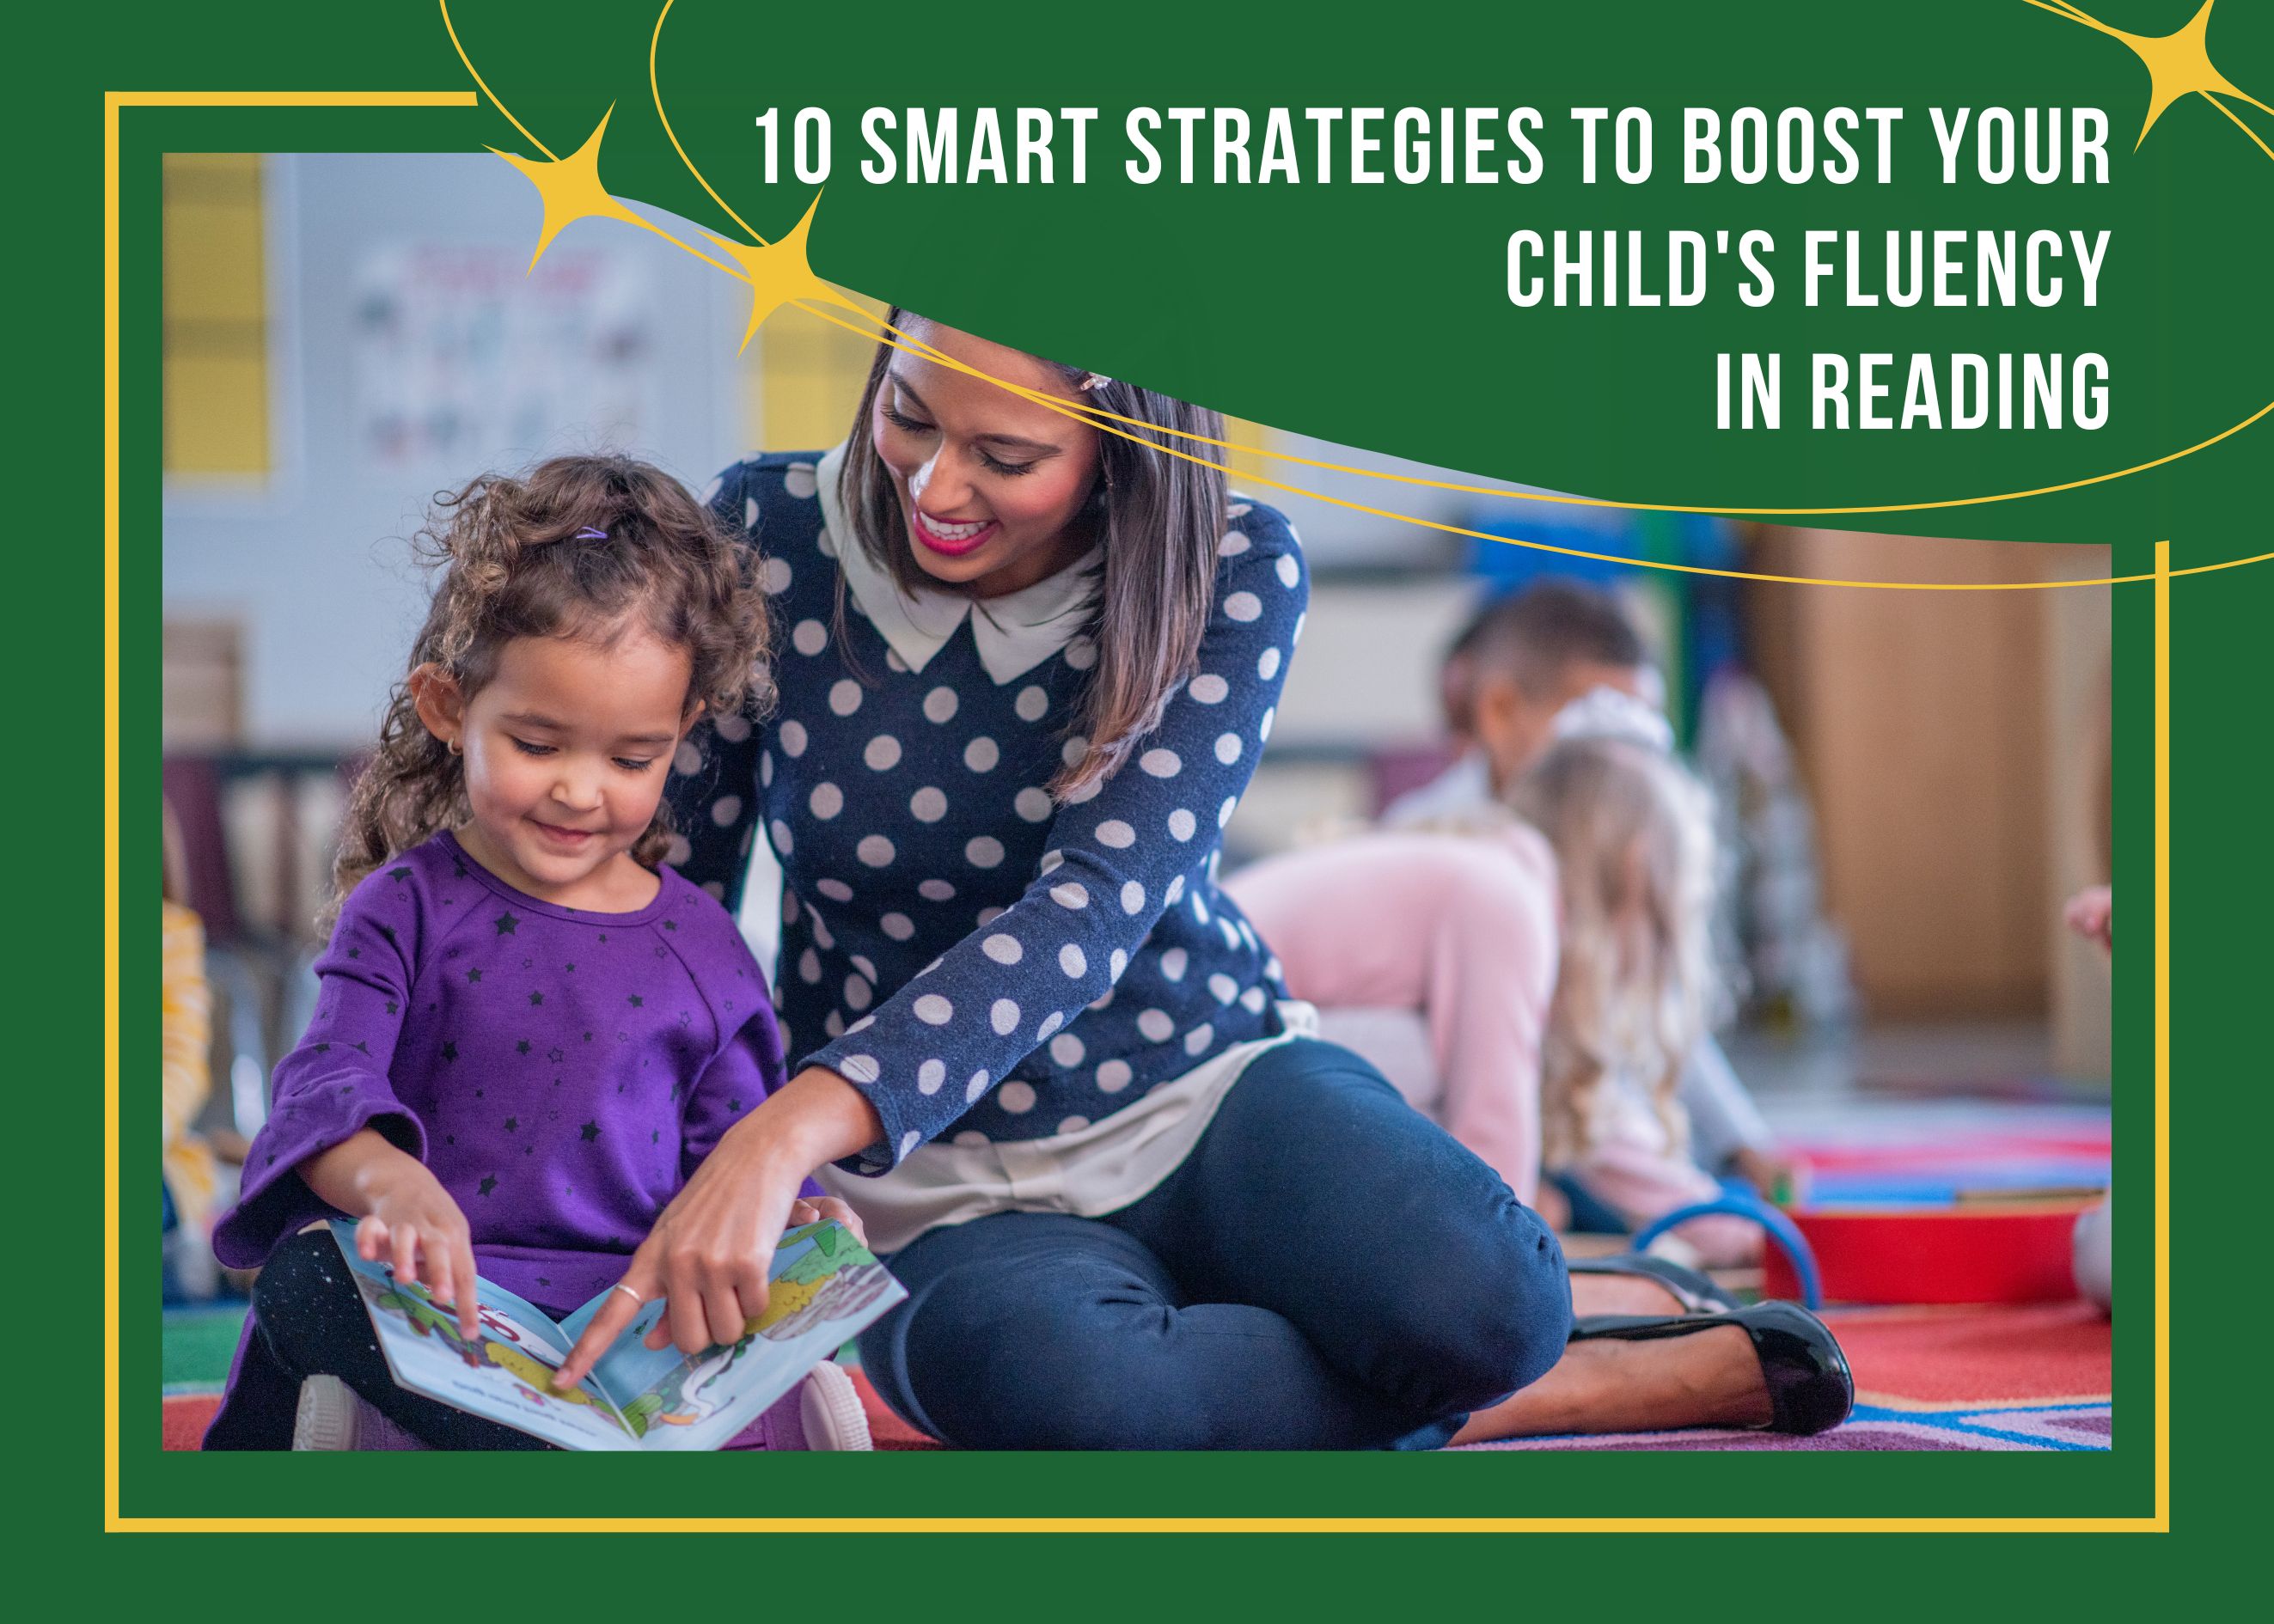 Boost your Child's Fluency in Reading